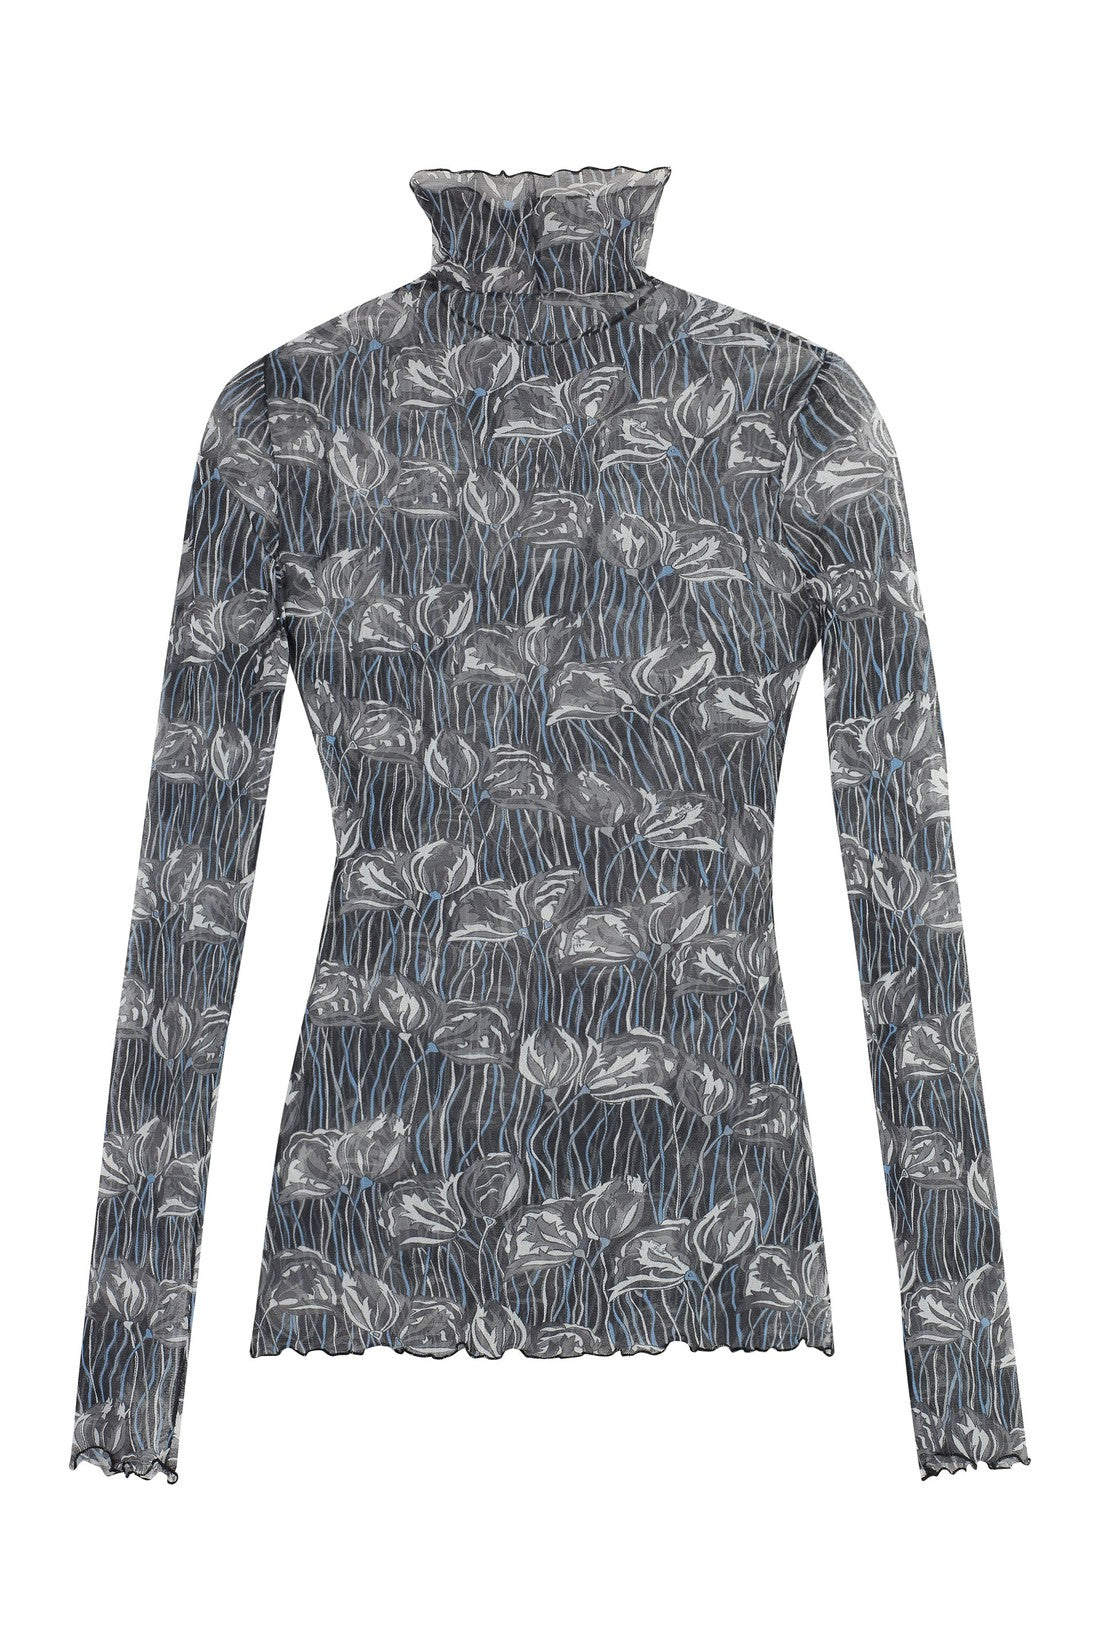 PUCCI-OUTLET-SALE-Printed long-sleeve top-ARCHIVIST